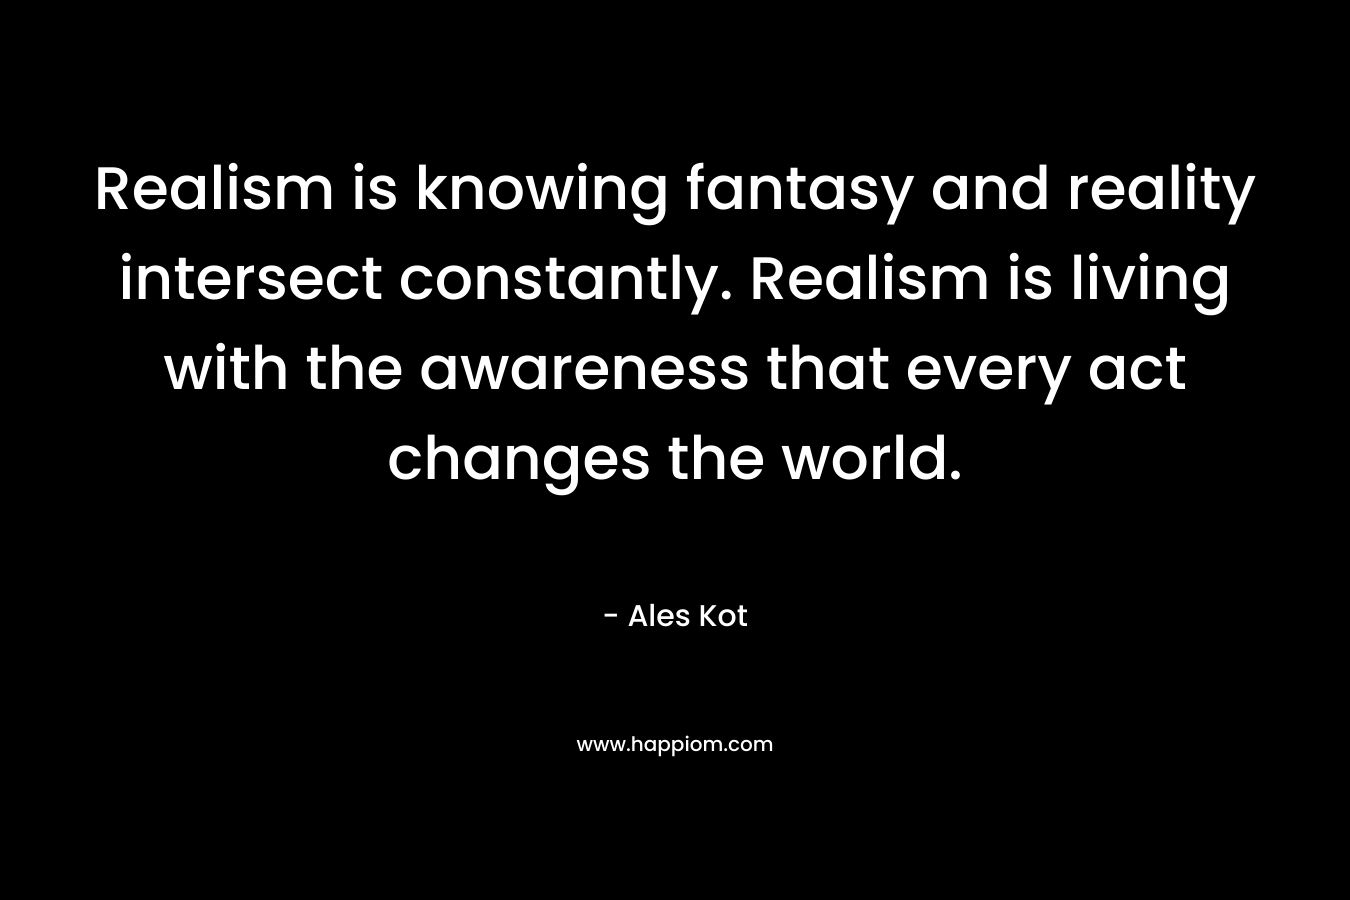 Realism is knowing fantasy and reality intersect constantly. Realism is living with the awareness that every act changes the world. – Ales Kot